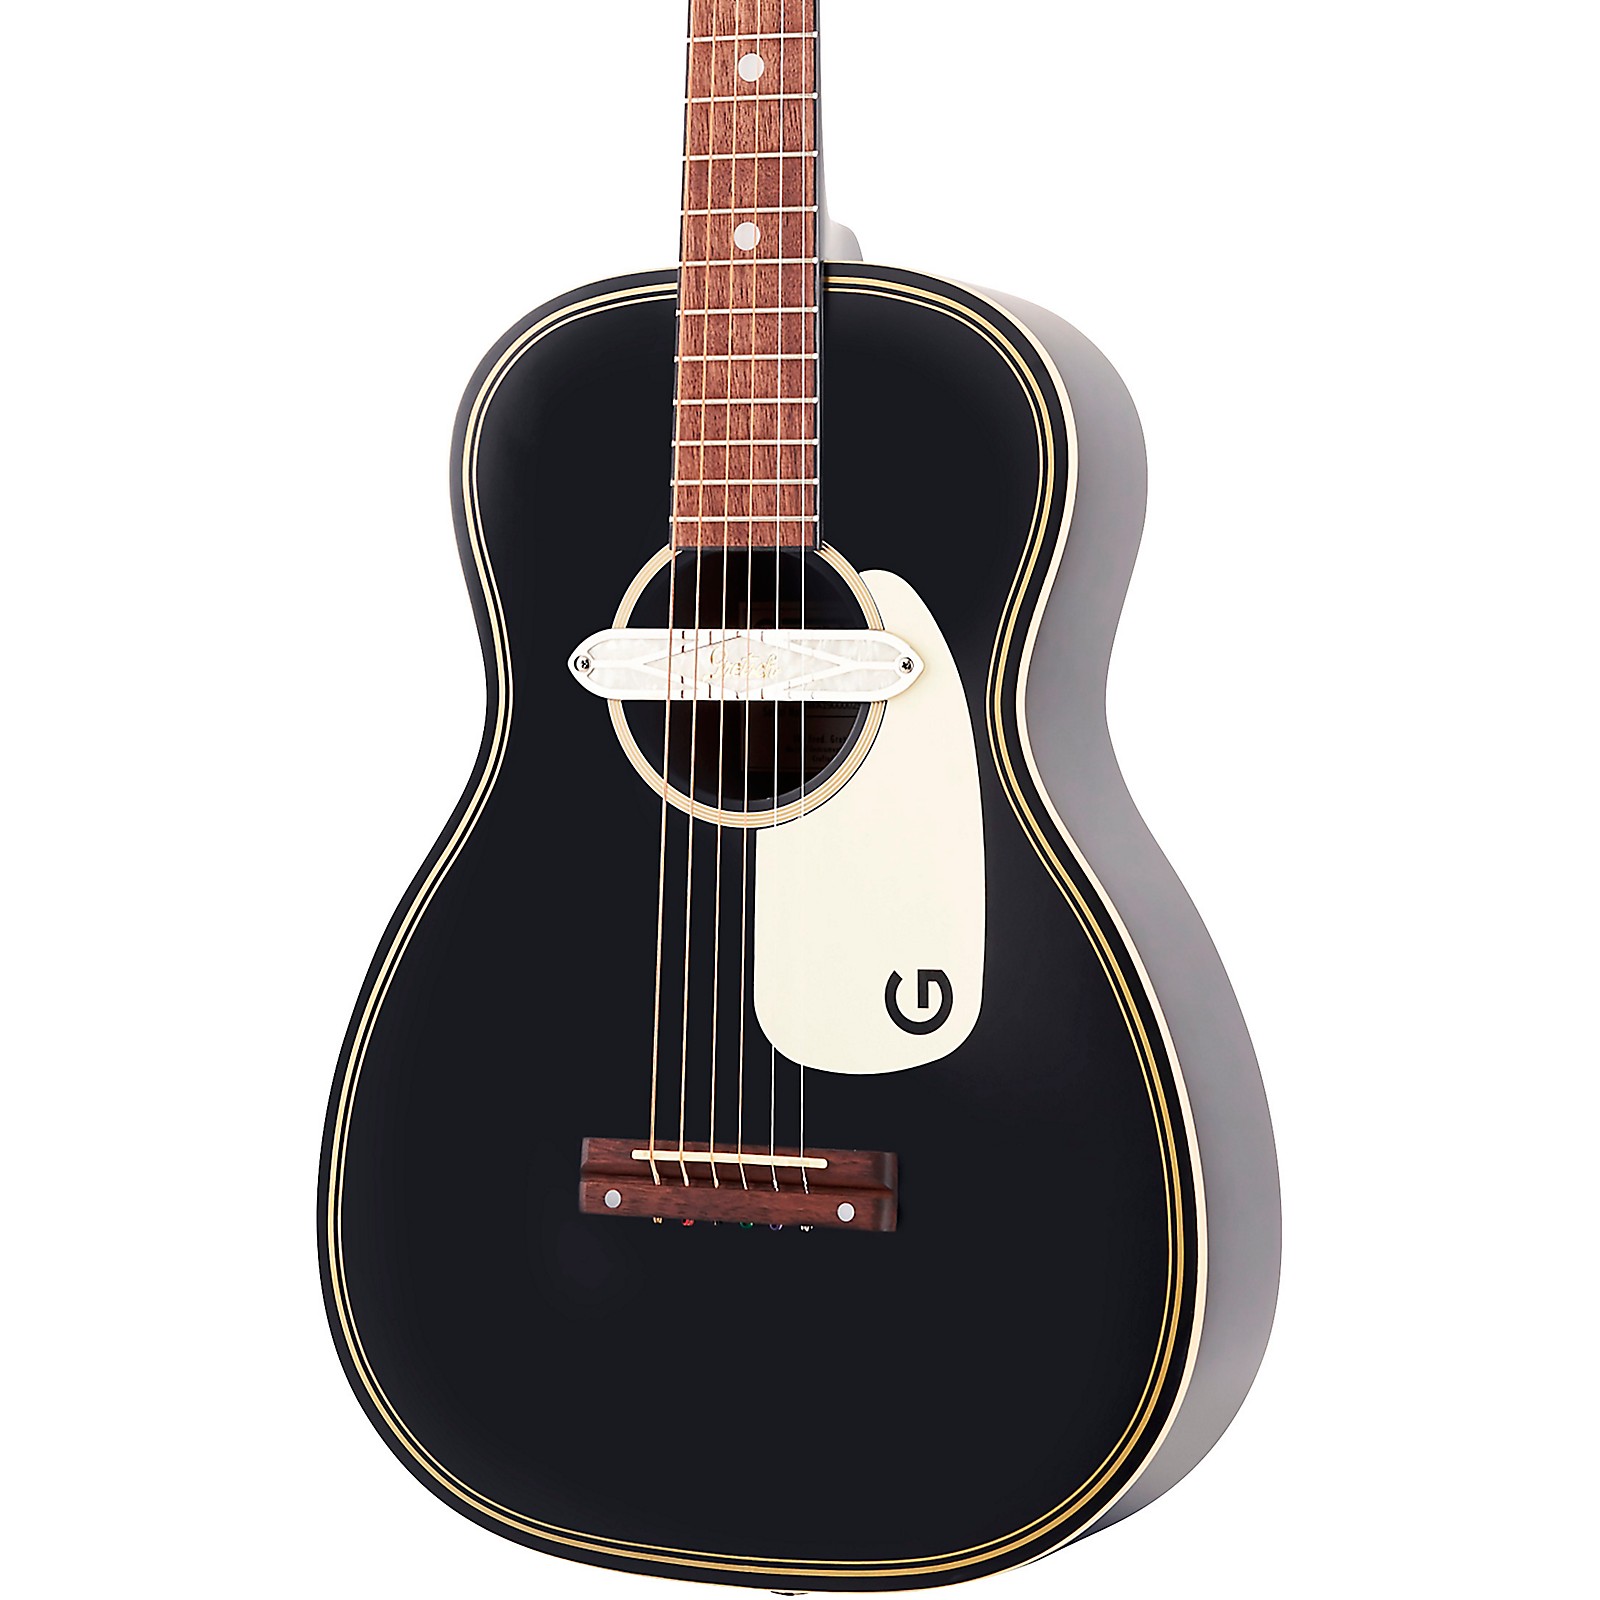 Gretsch Guitars G9520e Gin Rickey Acoustic Electric Guitar Black Guitar Center,Easy Fried Chicken Recipe Without Buttermilk